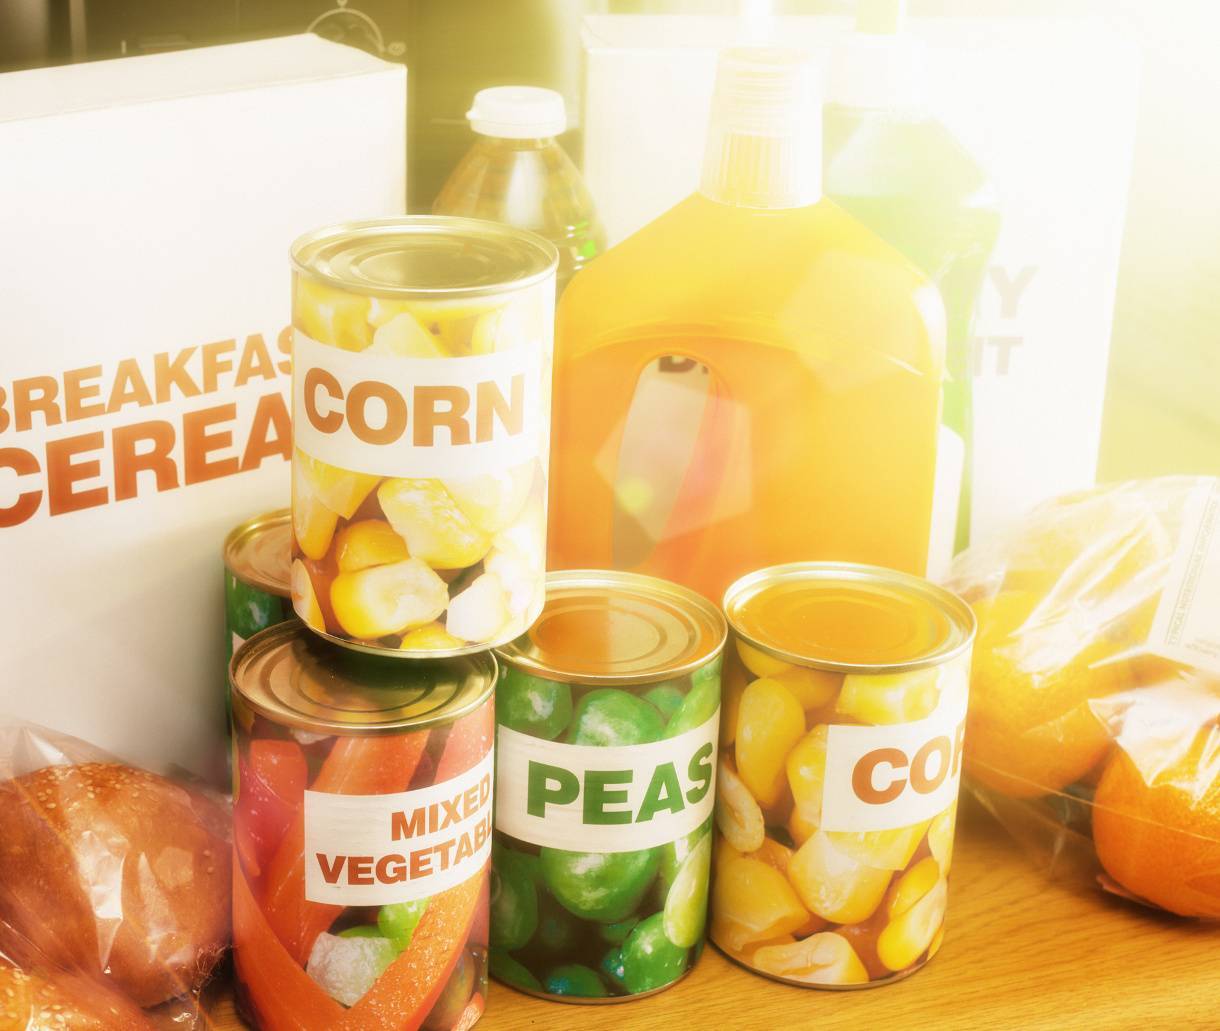 Cans of vegetables and food products